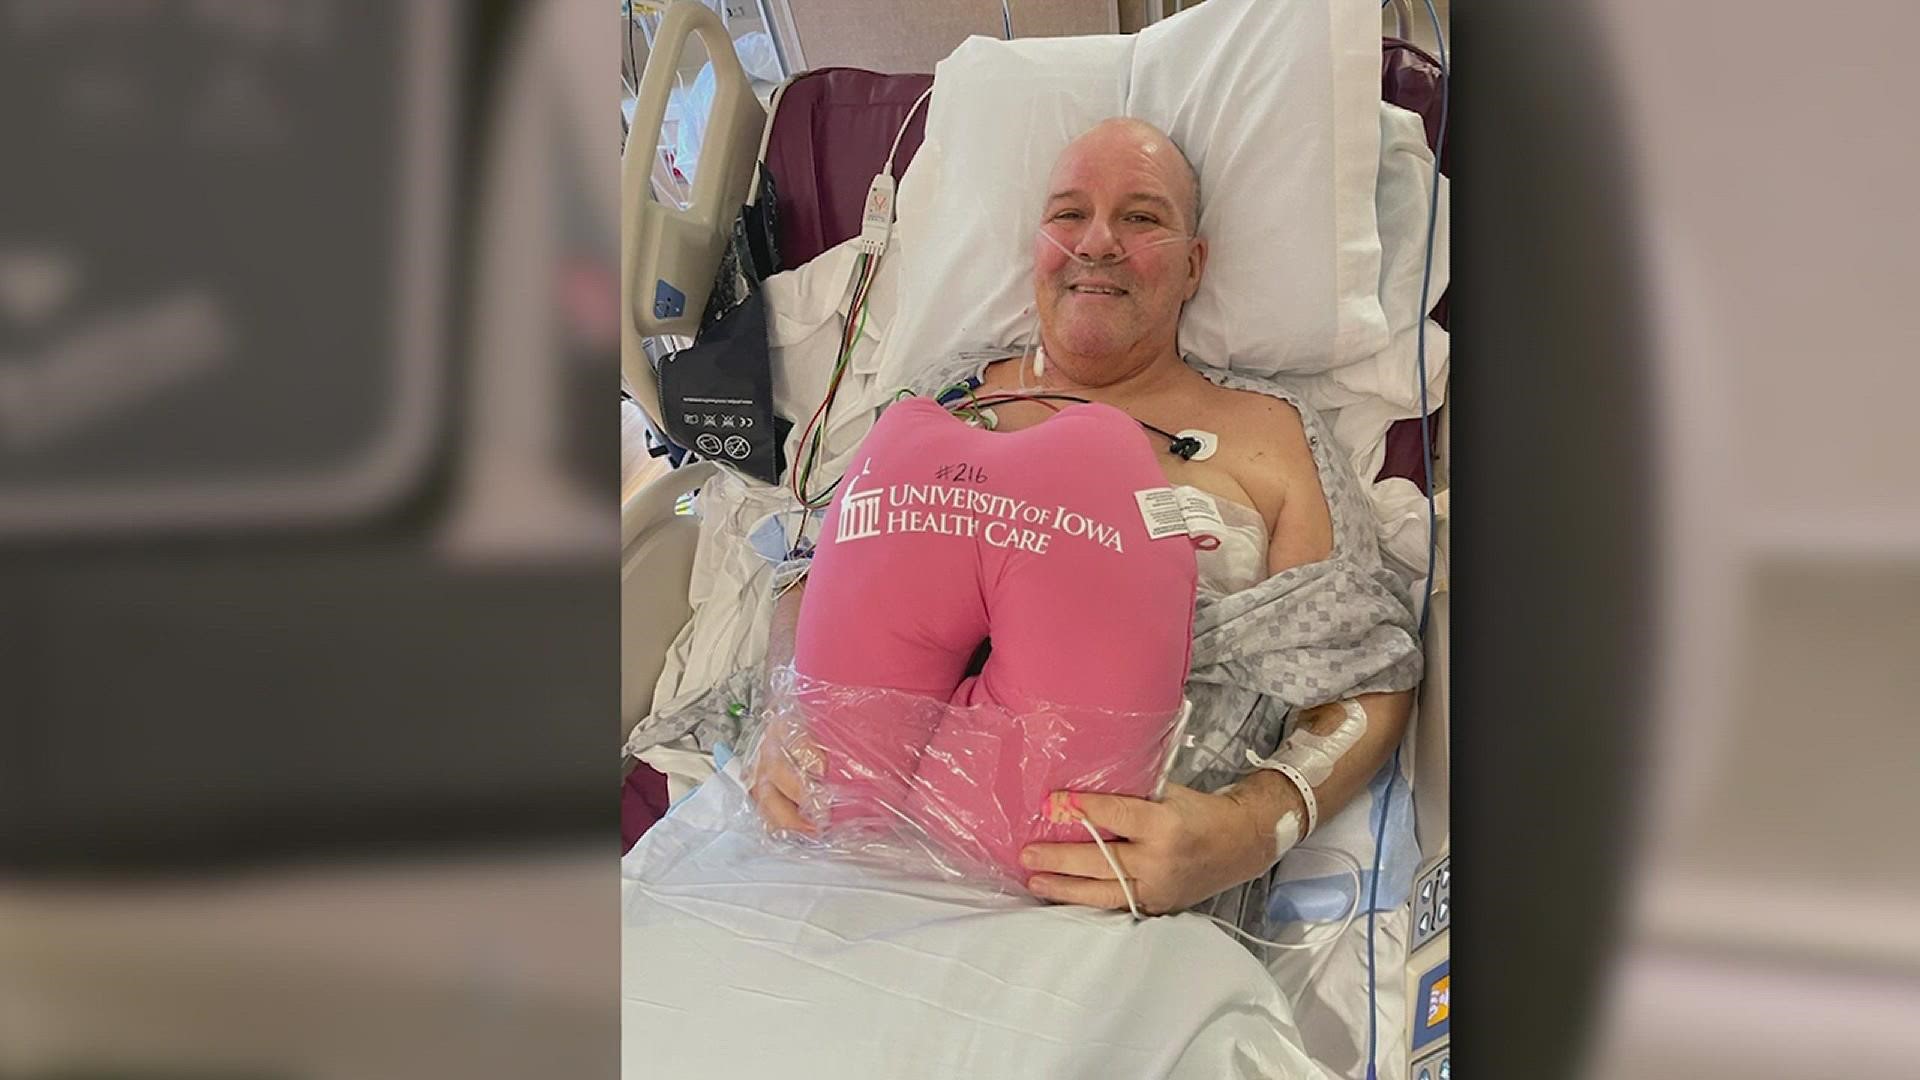 After over five months in Iowa City at the hospital Randy McIntyre received his new lungs